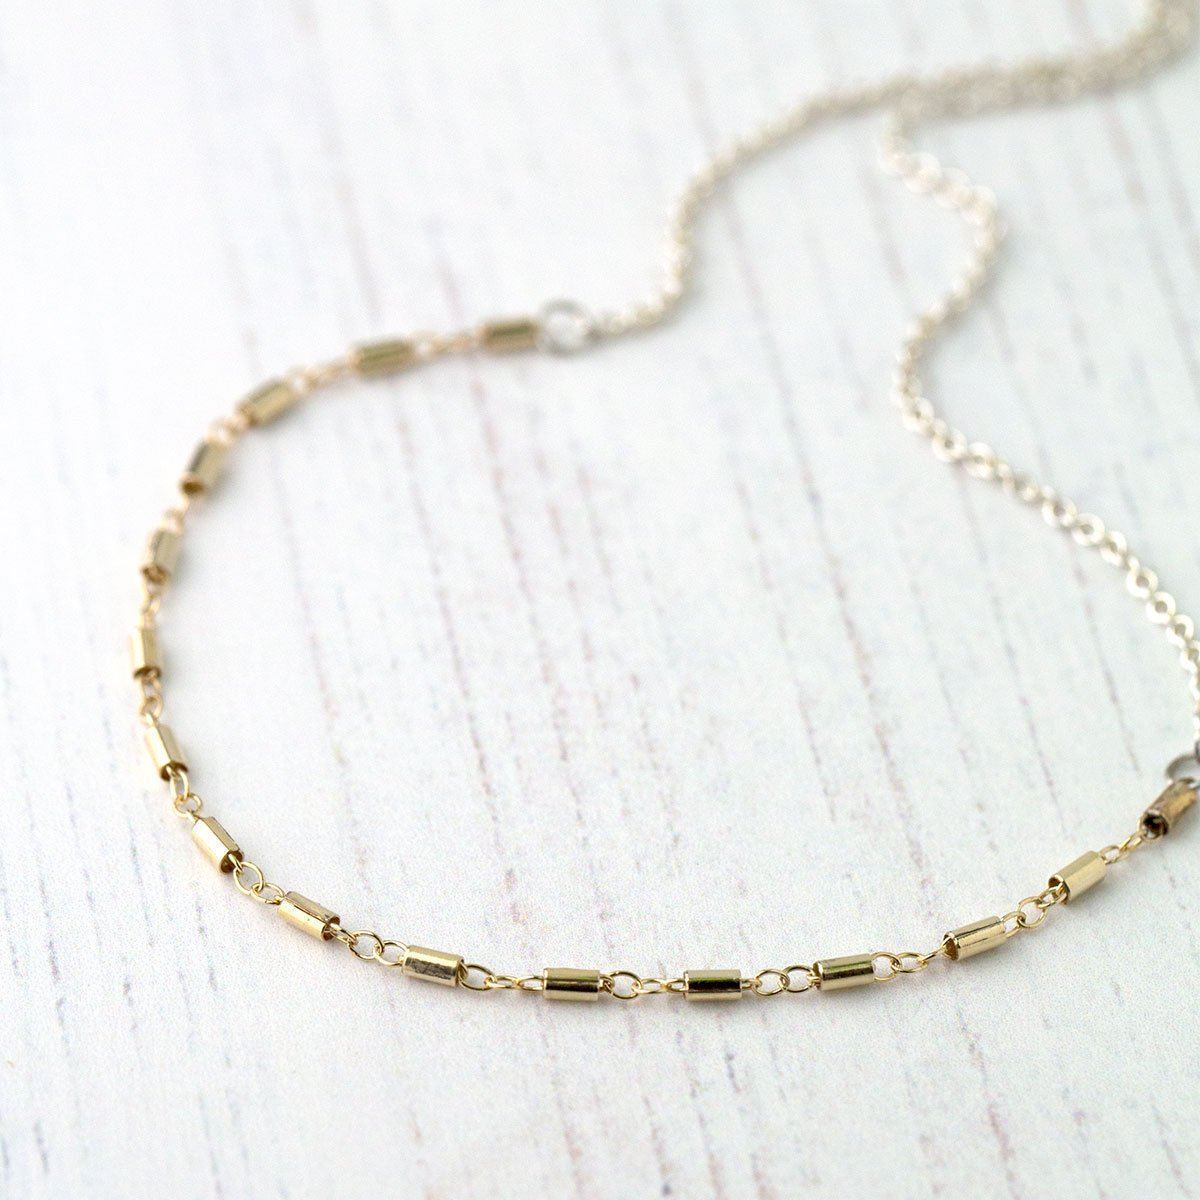 Mixed Metals Gold & Silver Necklace - Handmade Jewelry by Burnish